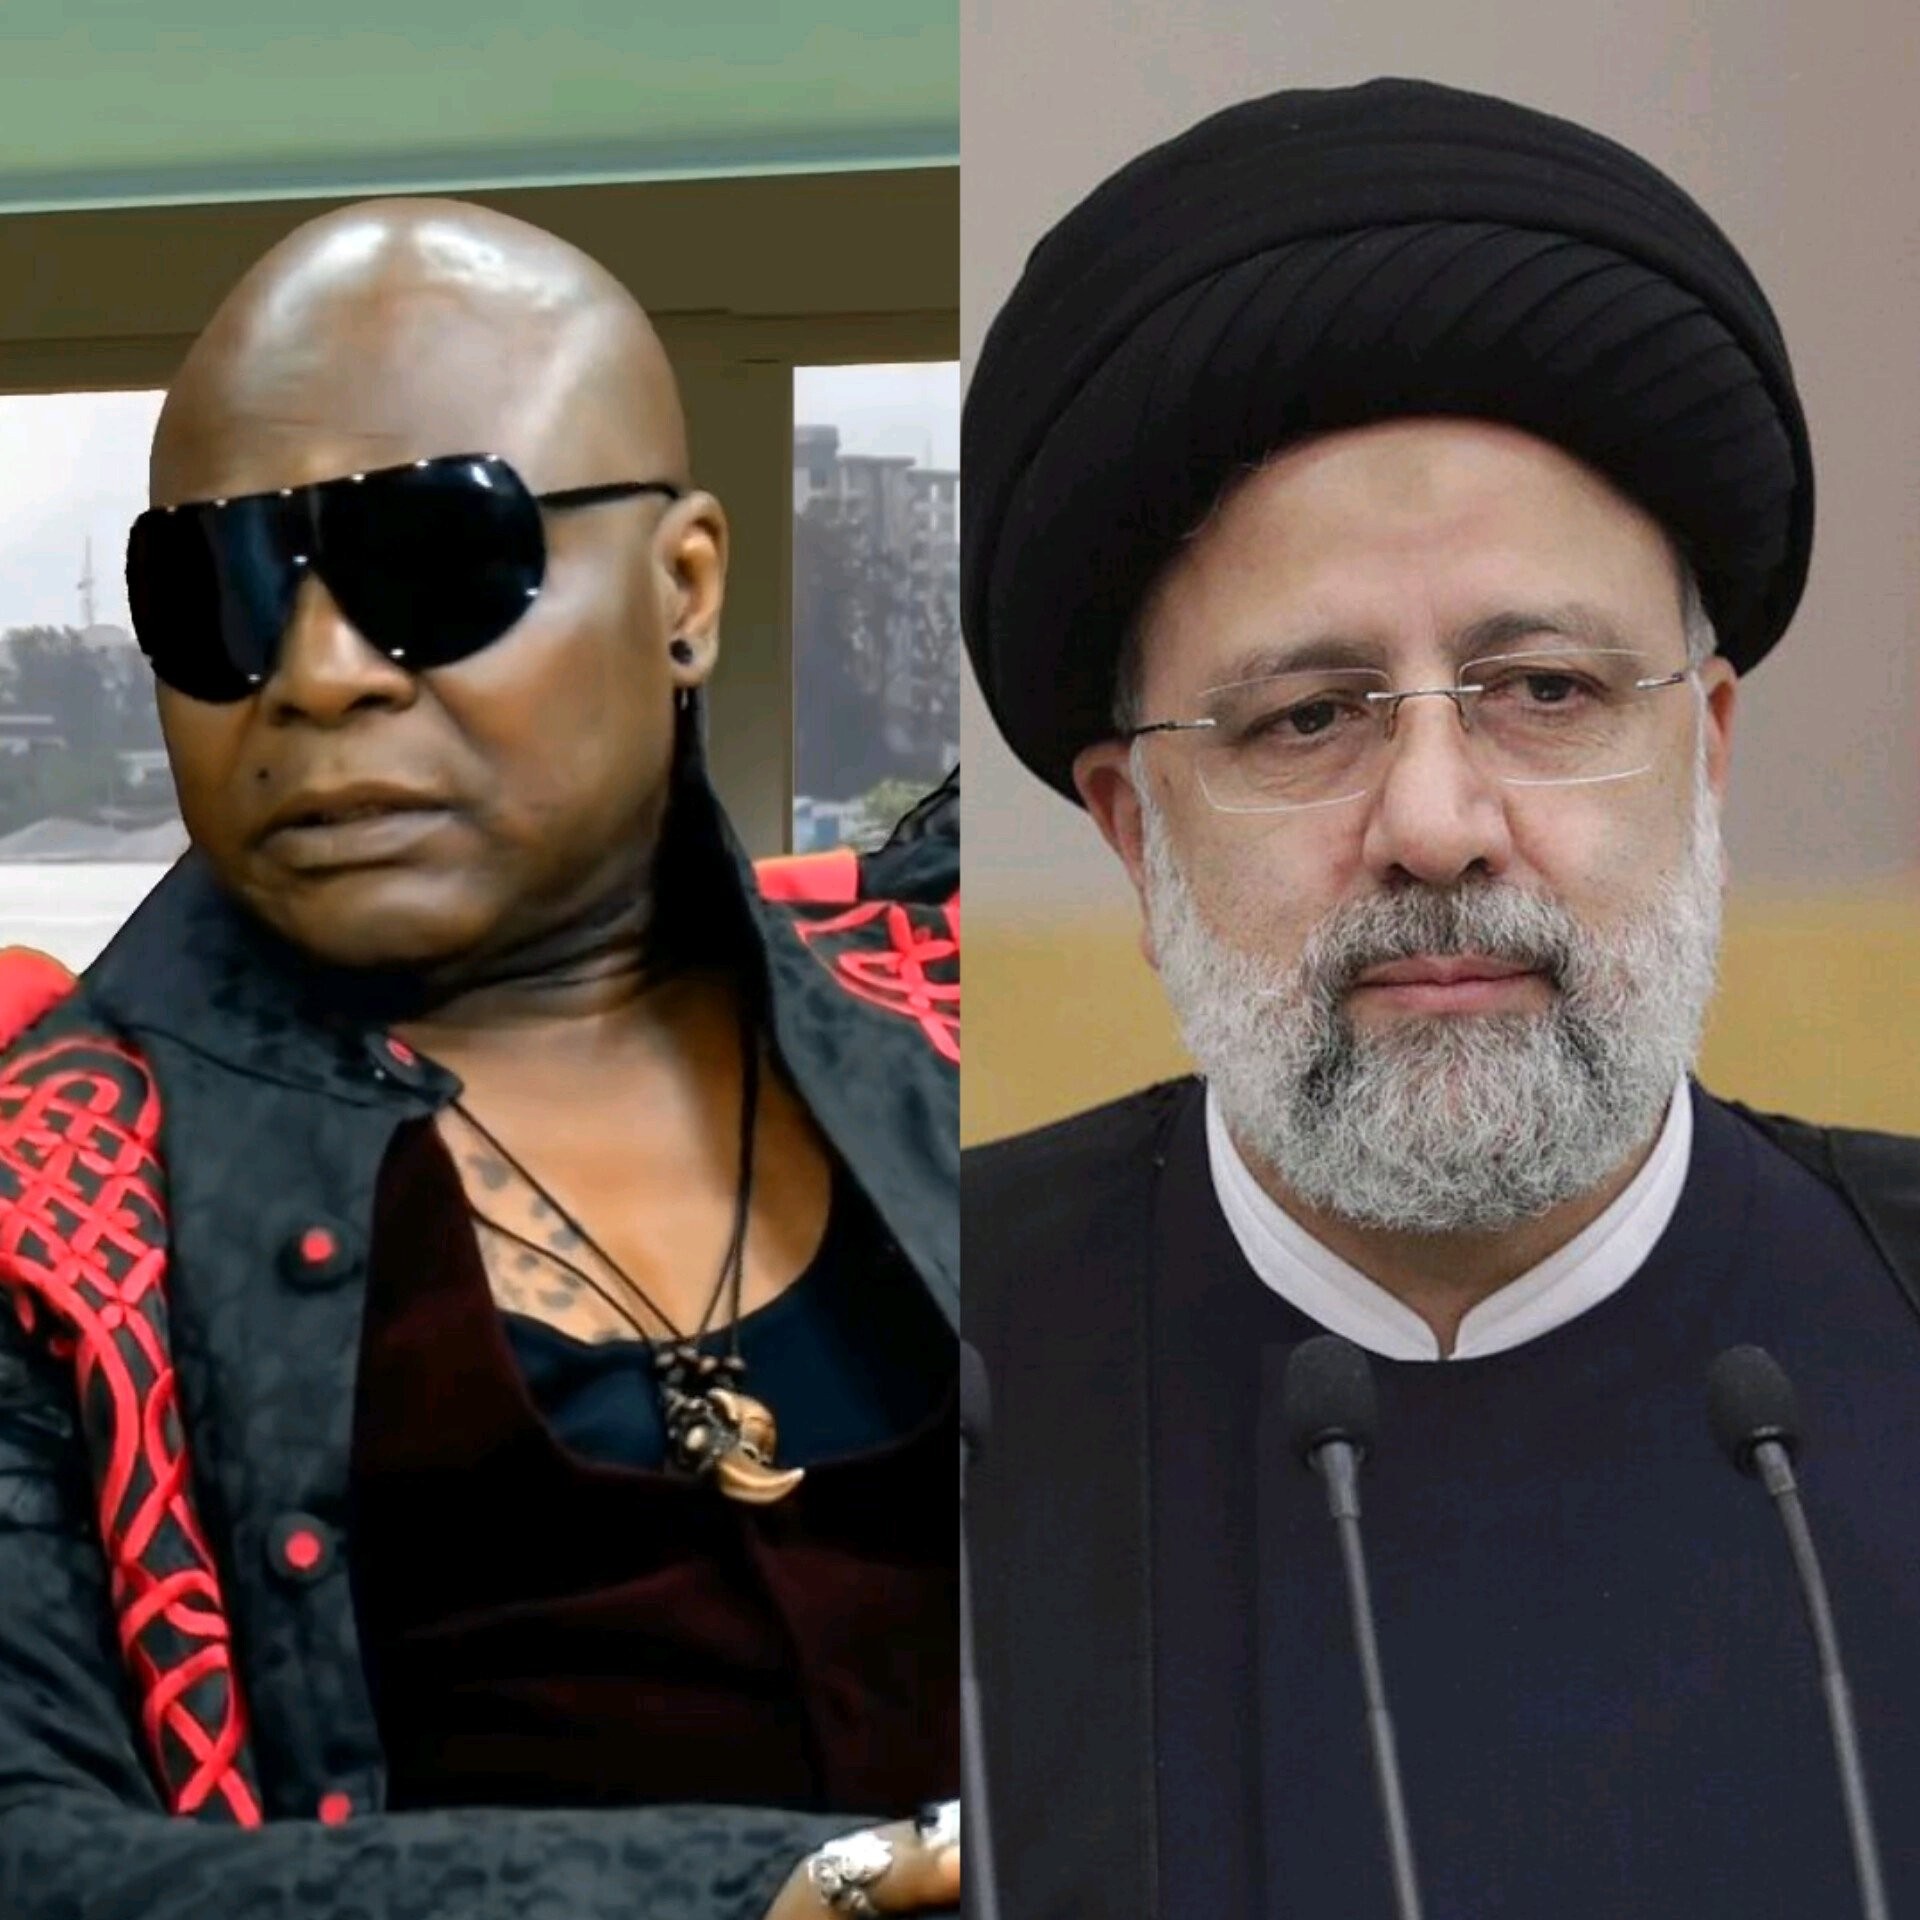 JUST-IN: "Some Iranians seem to be happy about this news" Charly Boy response to death of Iran's President